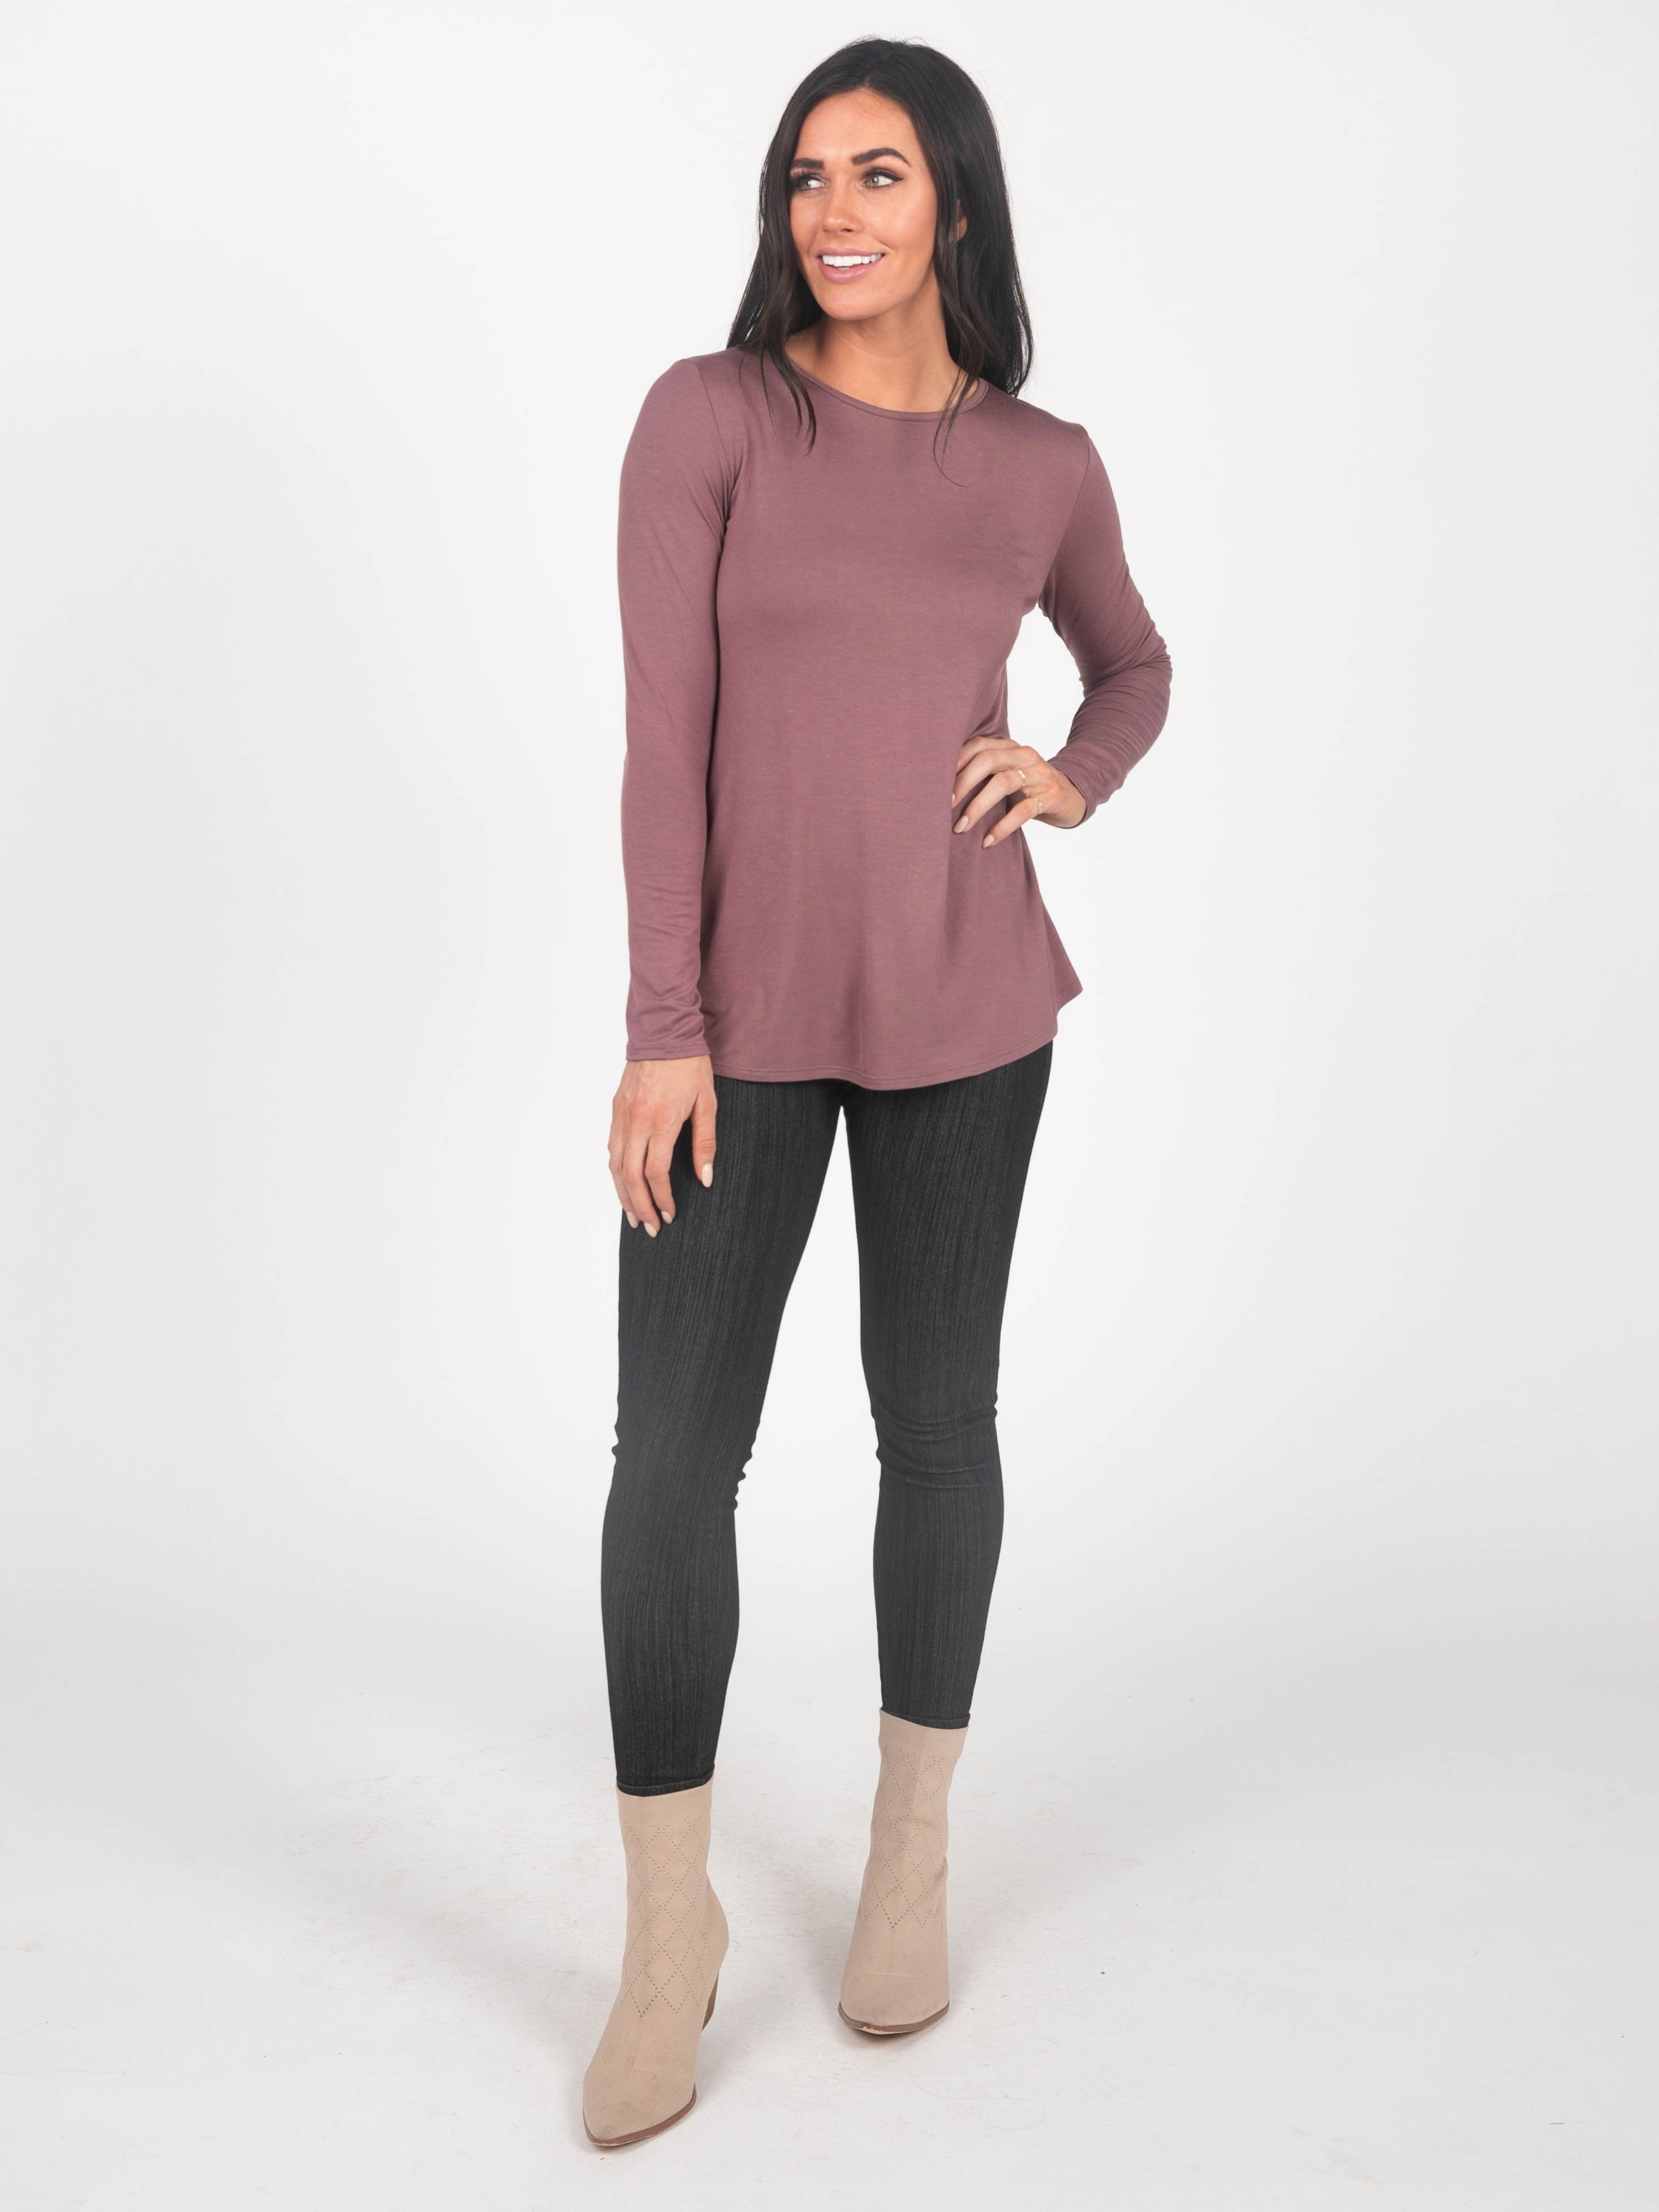 Long Sleeve Fitted Tee in Mauve Latte